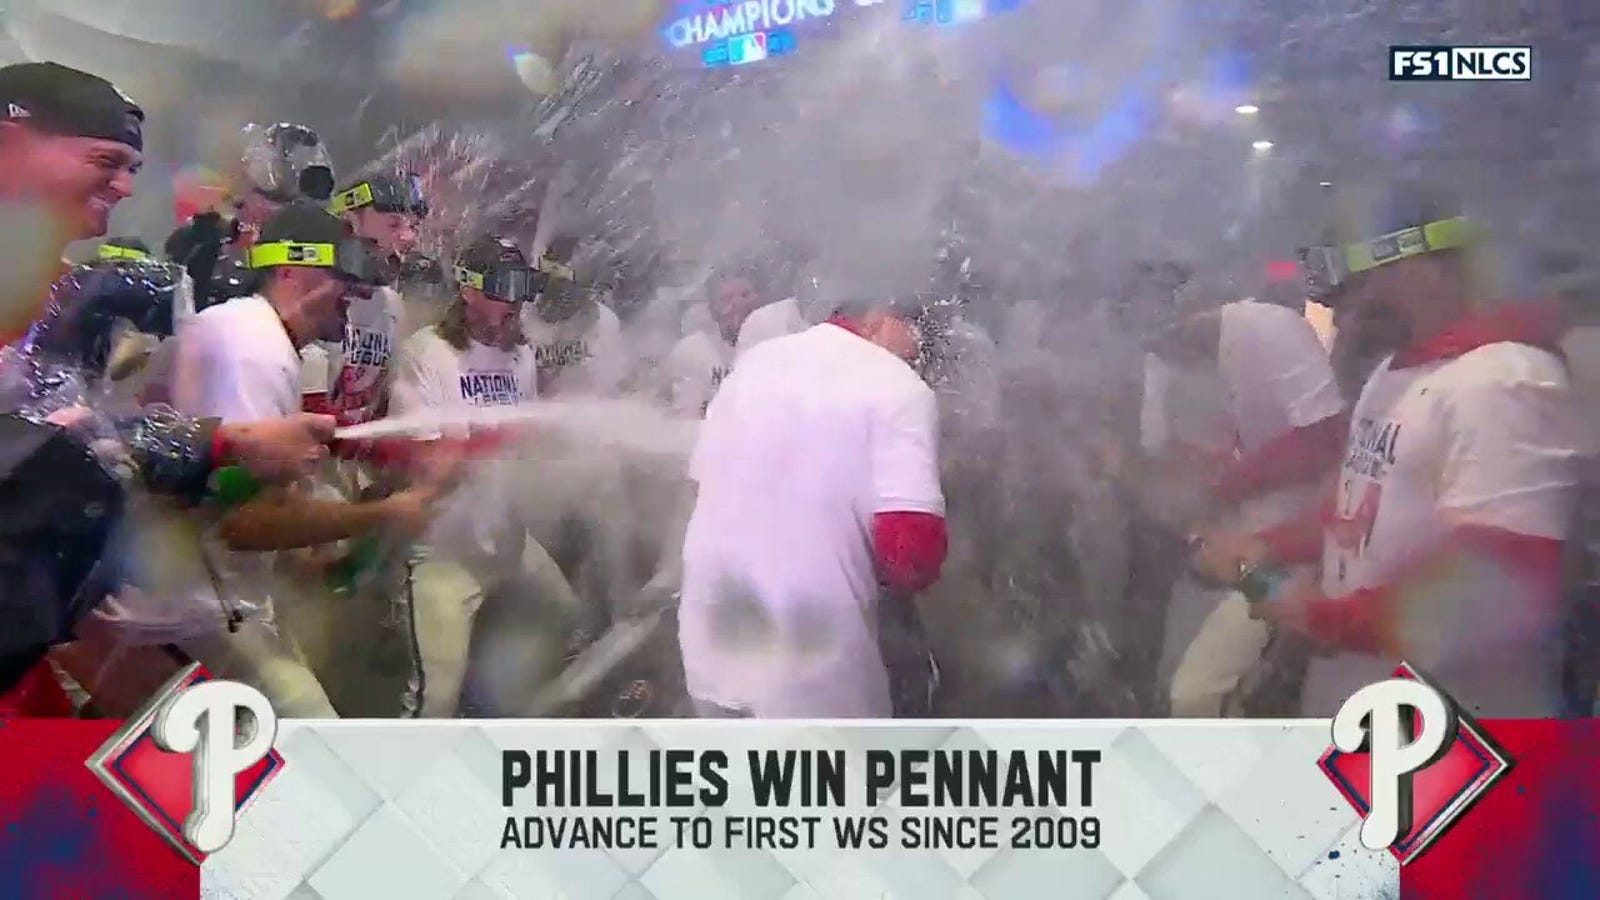 The Phillies celebrate making it to the World Series for the first time since 2009